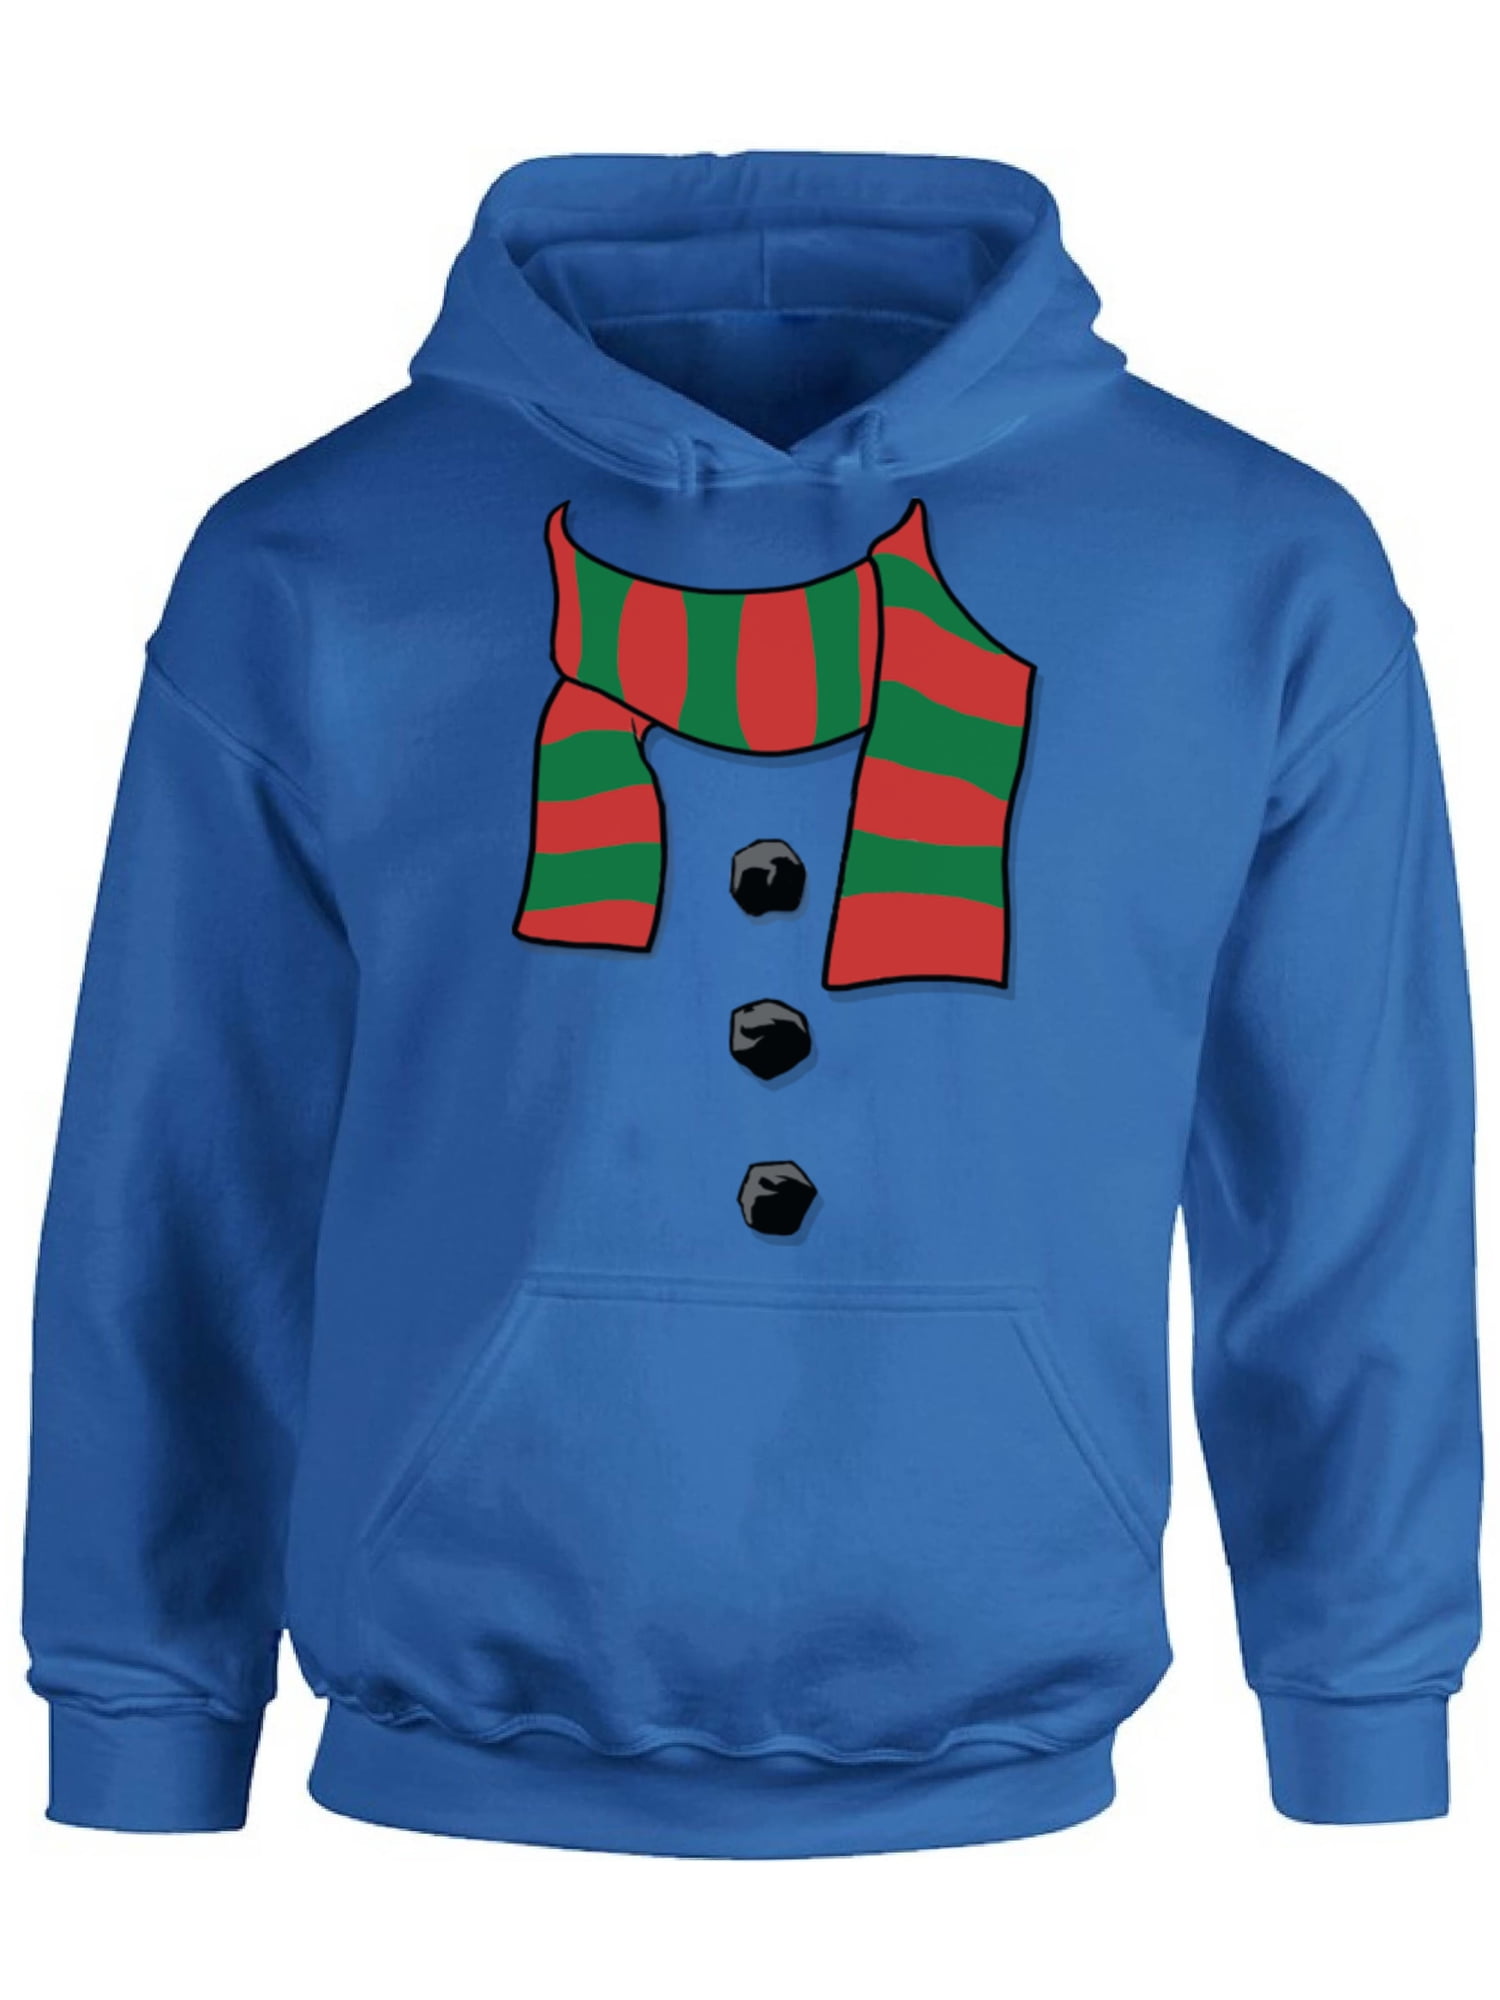 Awkward Styles Snowman Scarf Christmas Sweatshirt for Men and for Women ...